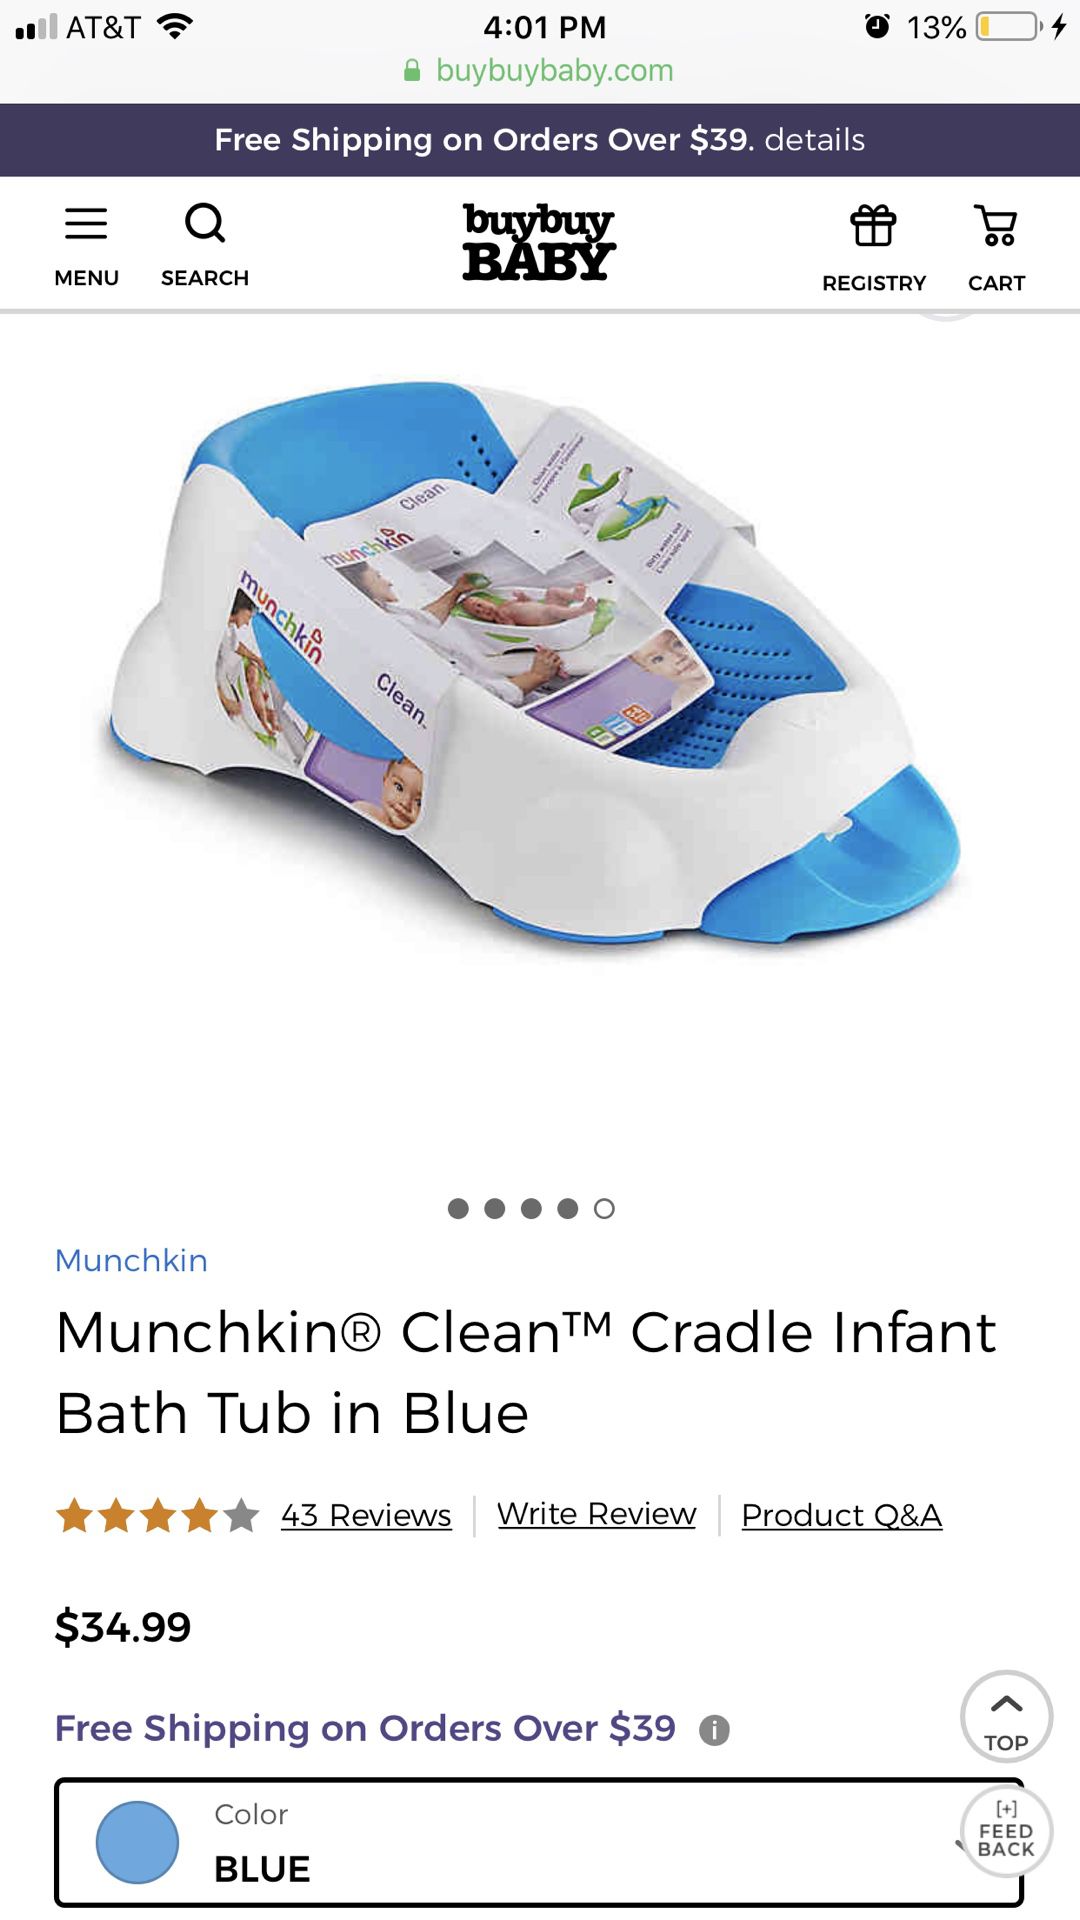 *New* Munchkin baby bath tub and toy scoop